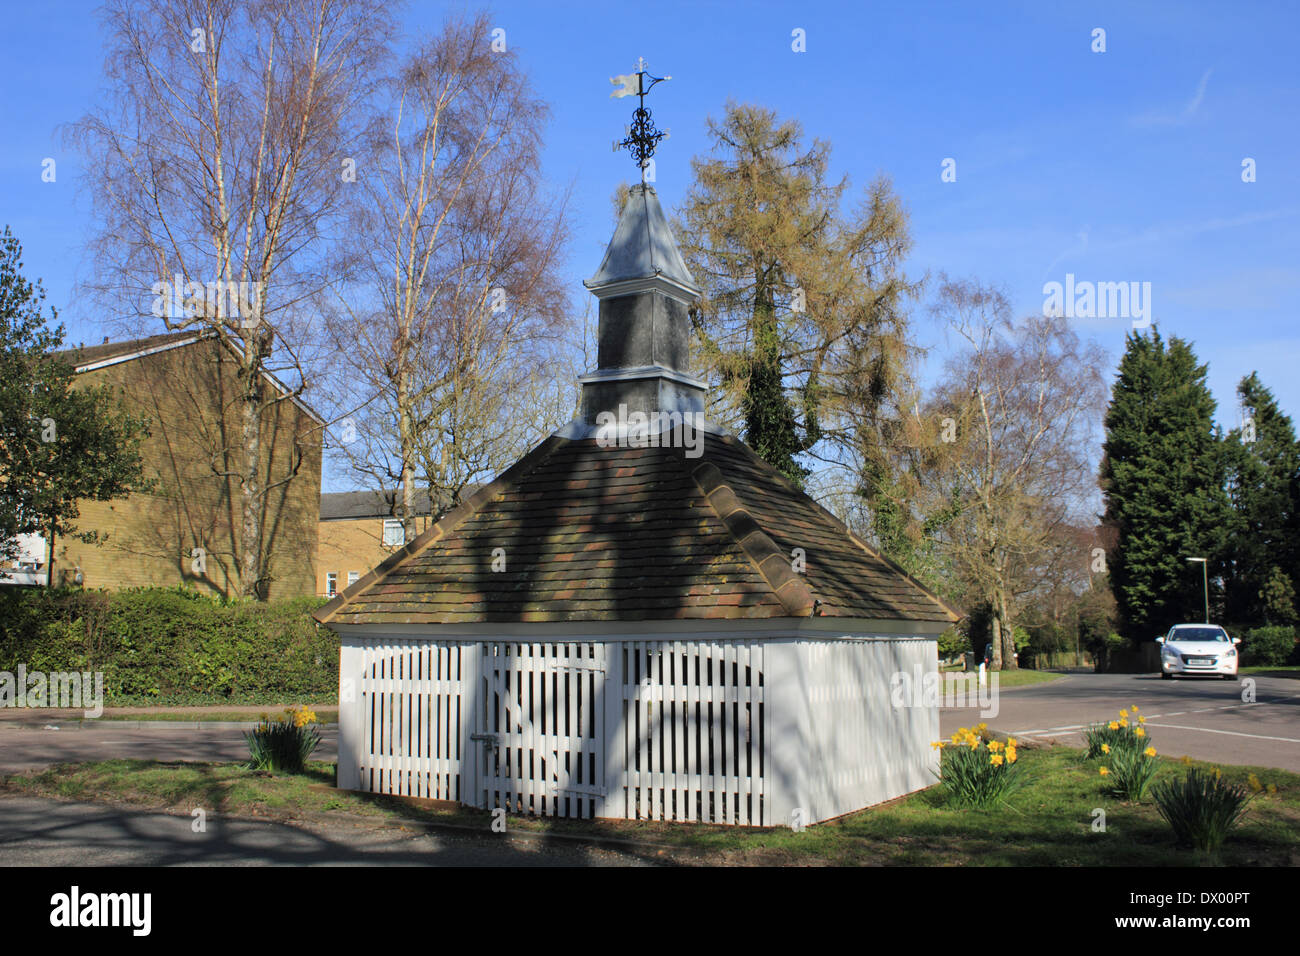 The old well at the junction of Park Road and Woodmansterne Lane, Banstead. Stock Photo